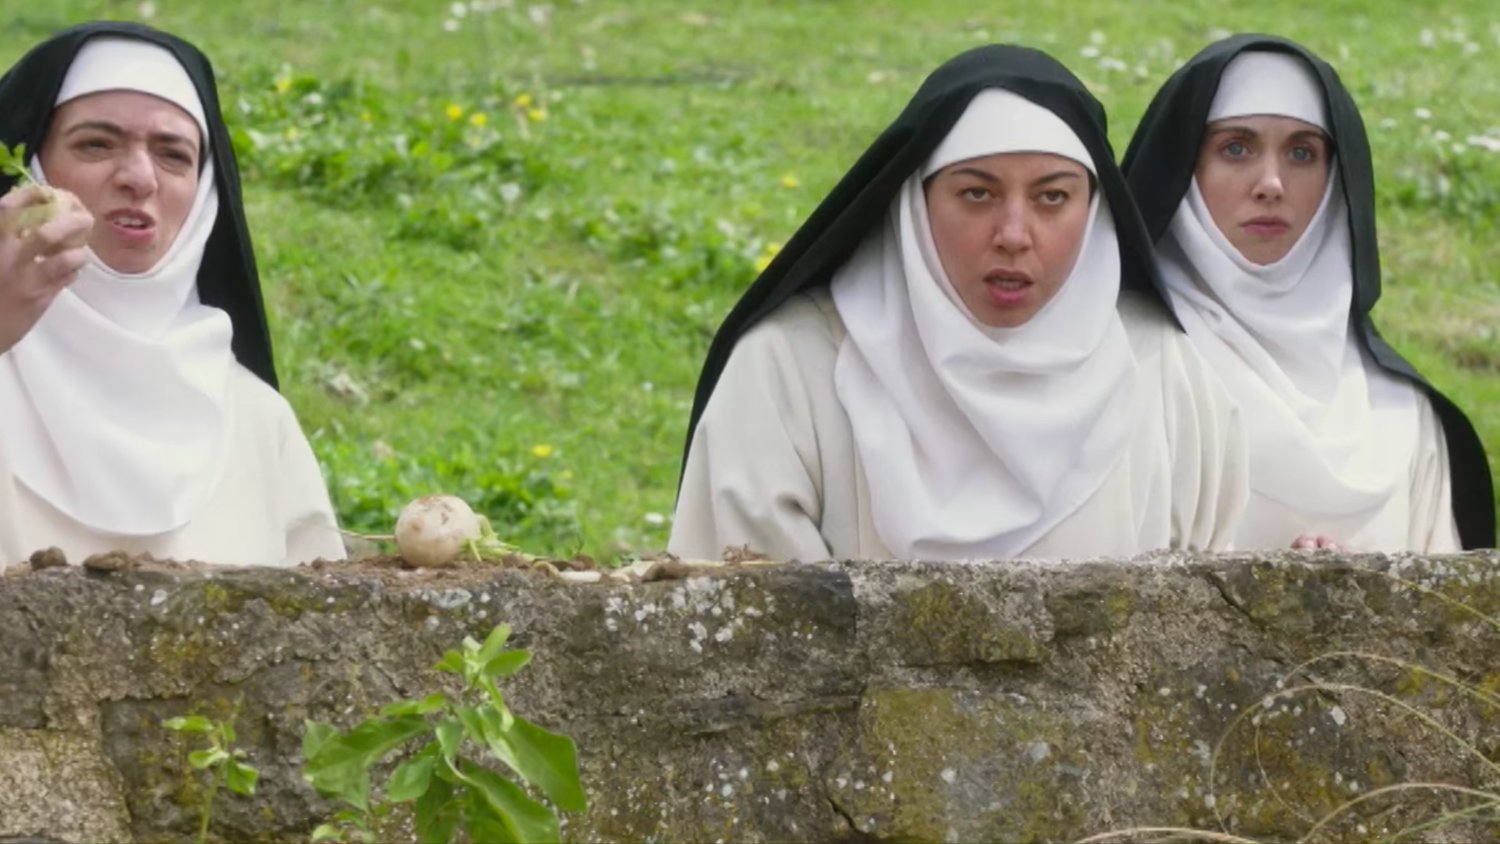 Nuns Get Crazy in Hilarious Red-Band Trailer for THE LITTLE HOURS ...